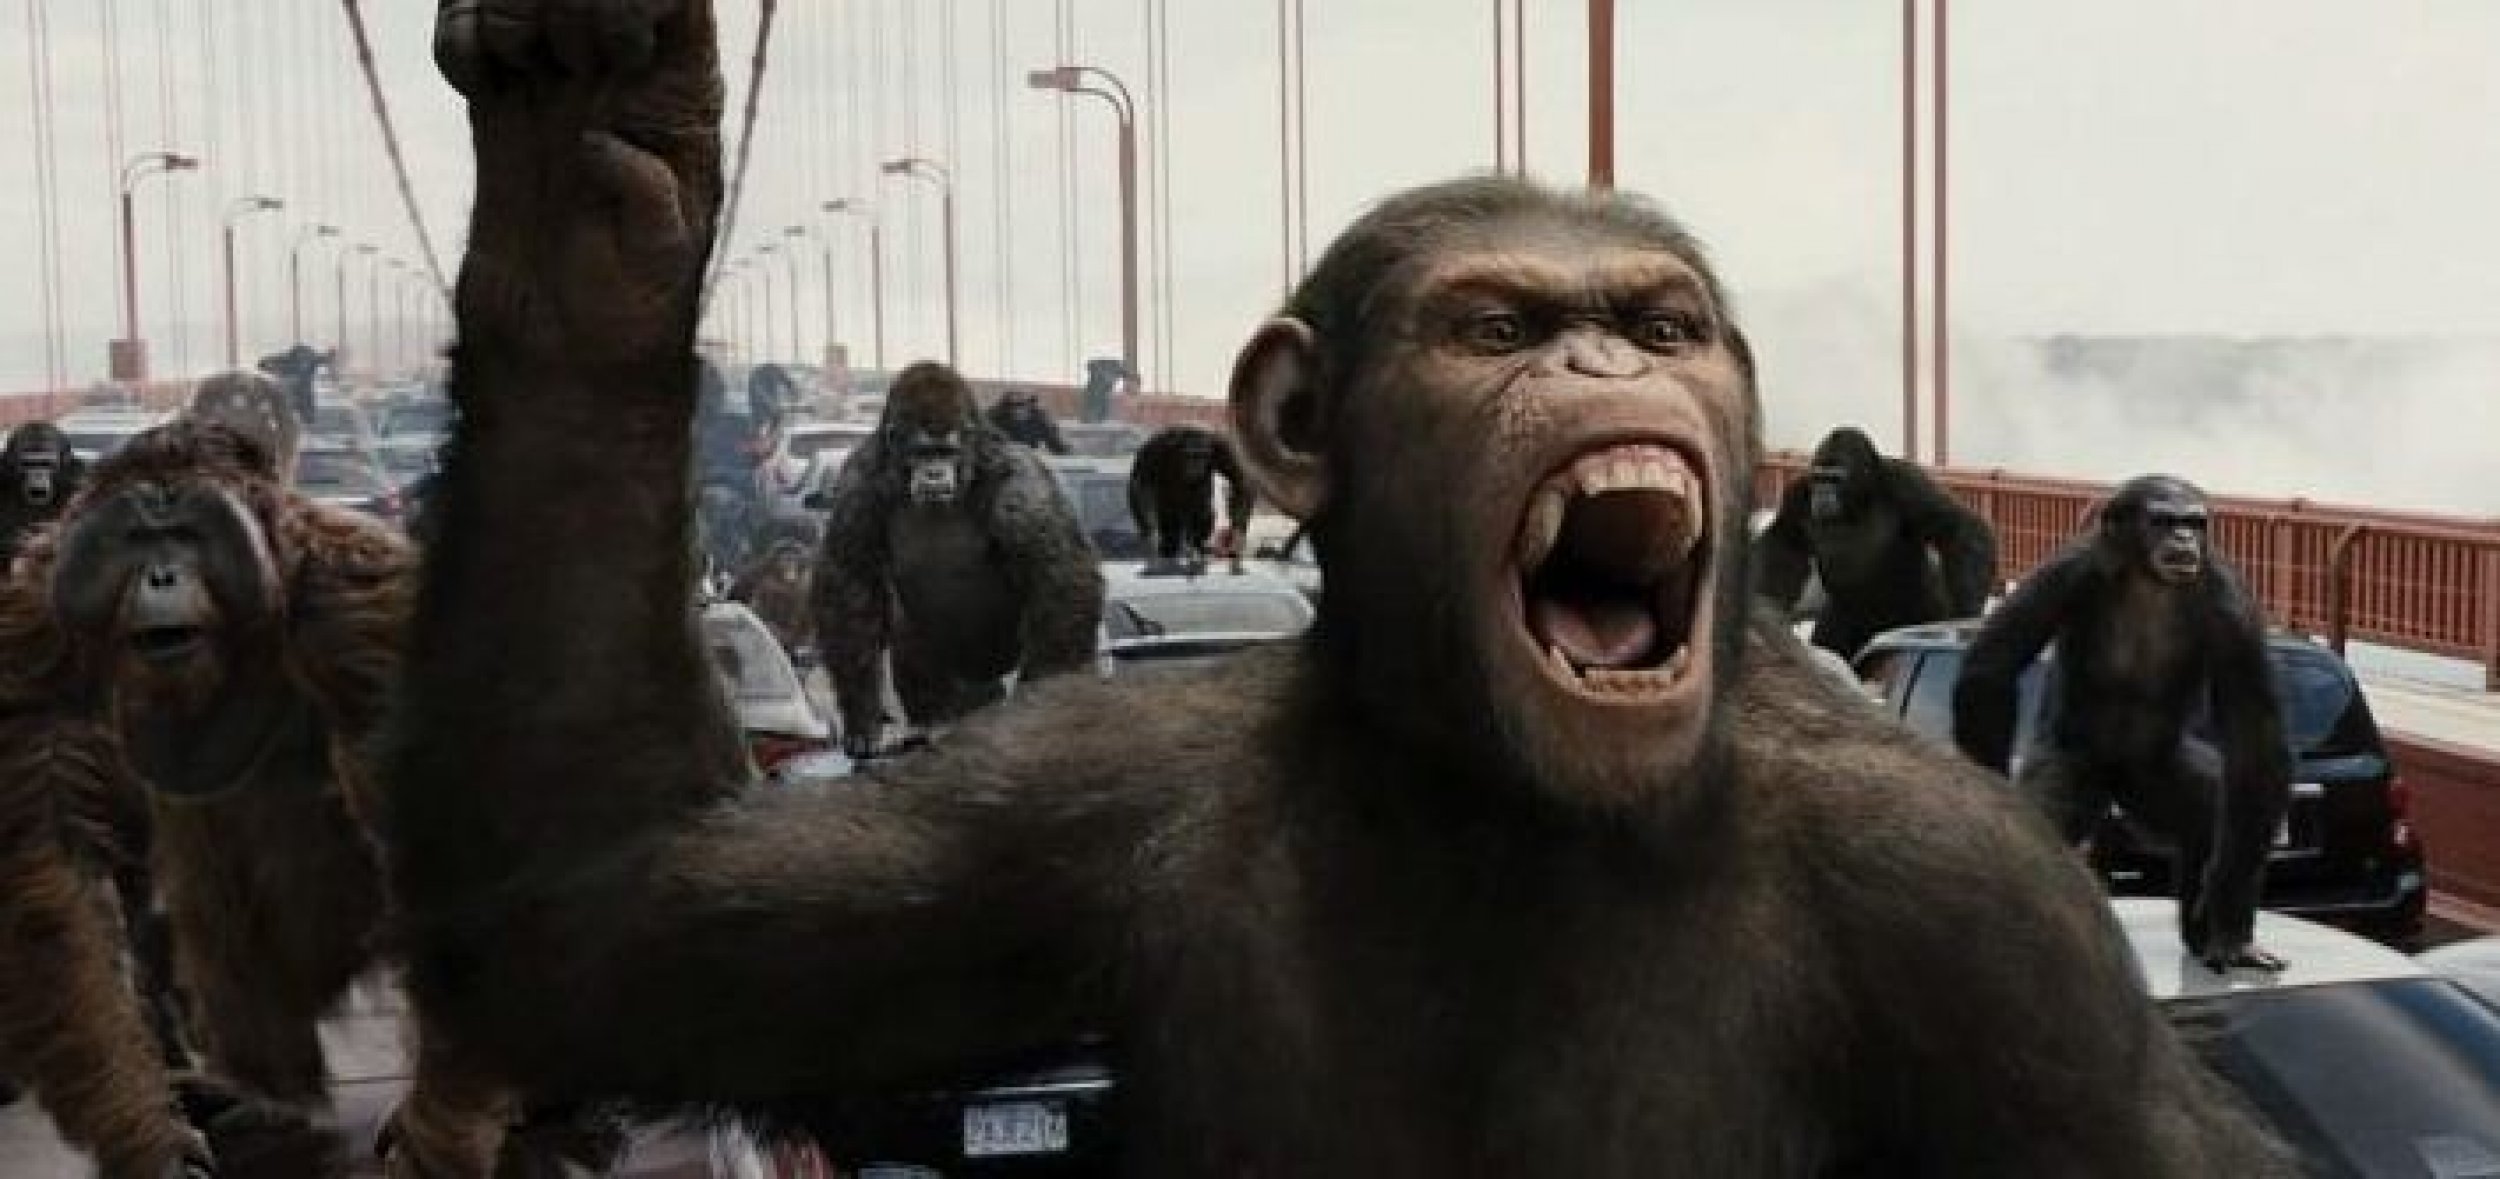 Apes Rule Theaters as 'Rise of the of the Apes' Tops Box Office